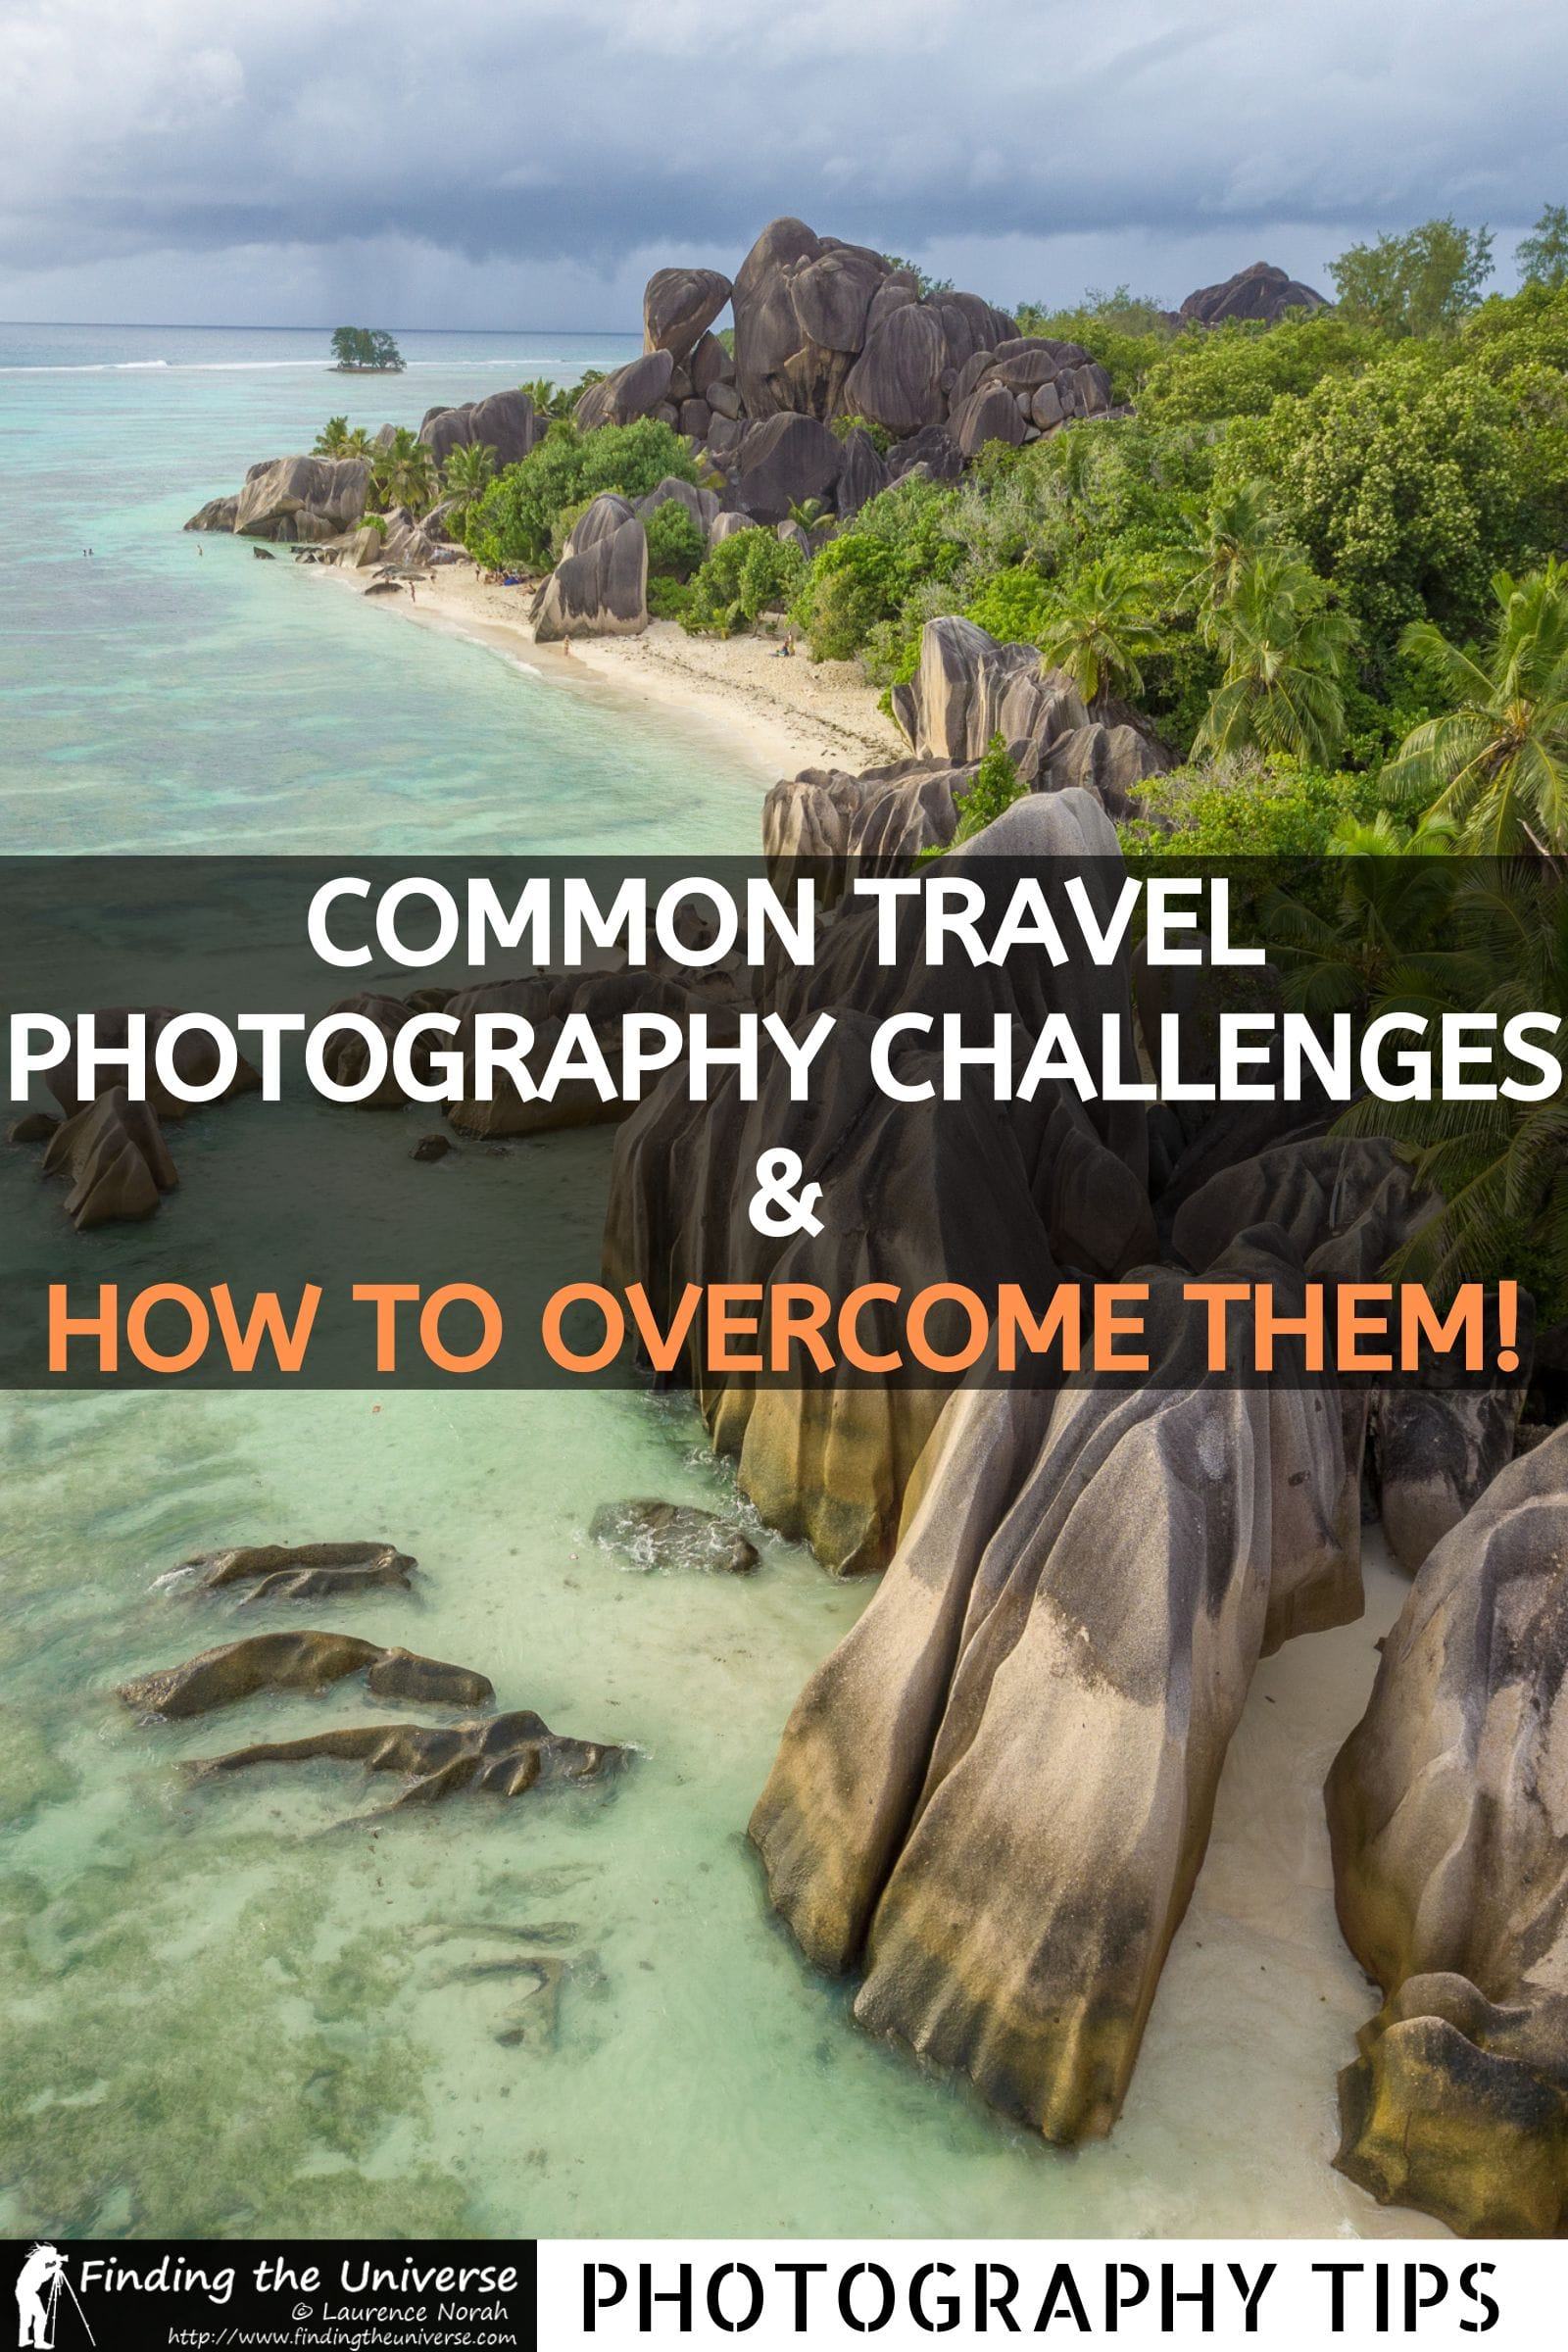 A guide to taking photos when traveling. Common issues and challenges you'll face when taking photos on a trip, and how to overcome them